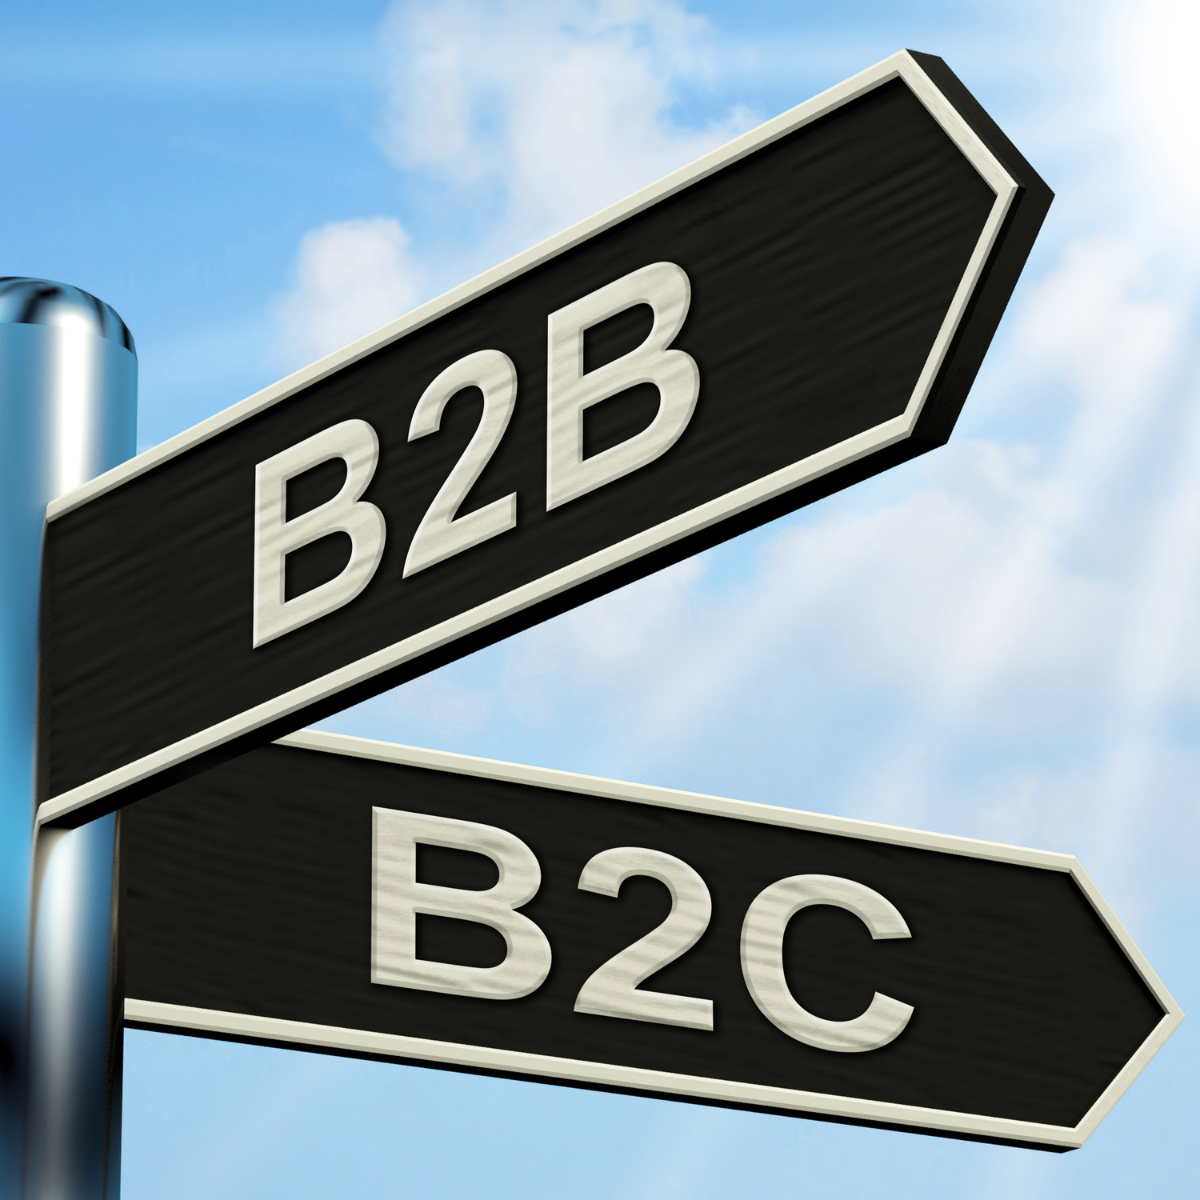 Image of a street sign intersection, with 'B2B' on one sign and 'B2C' on the other, symbolizing the versatile market reach of the Kentucky Cannabis Company Partner Program.